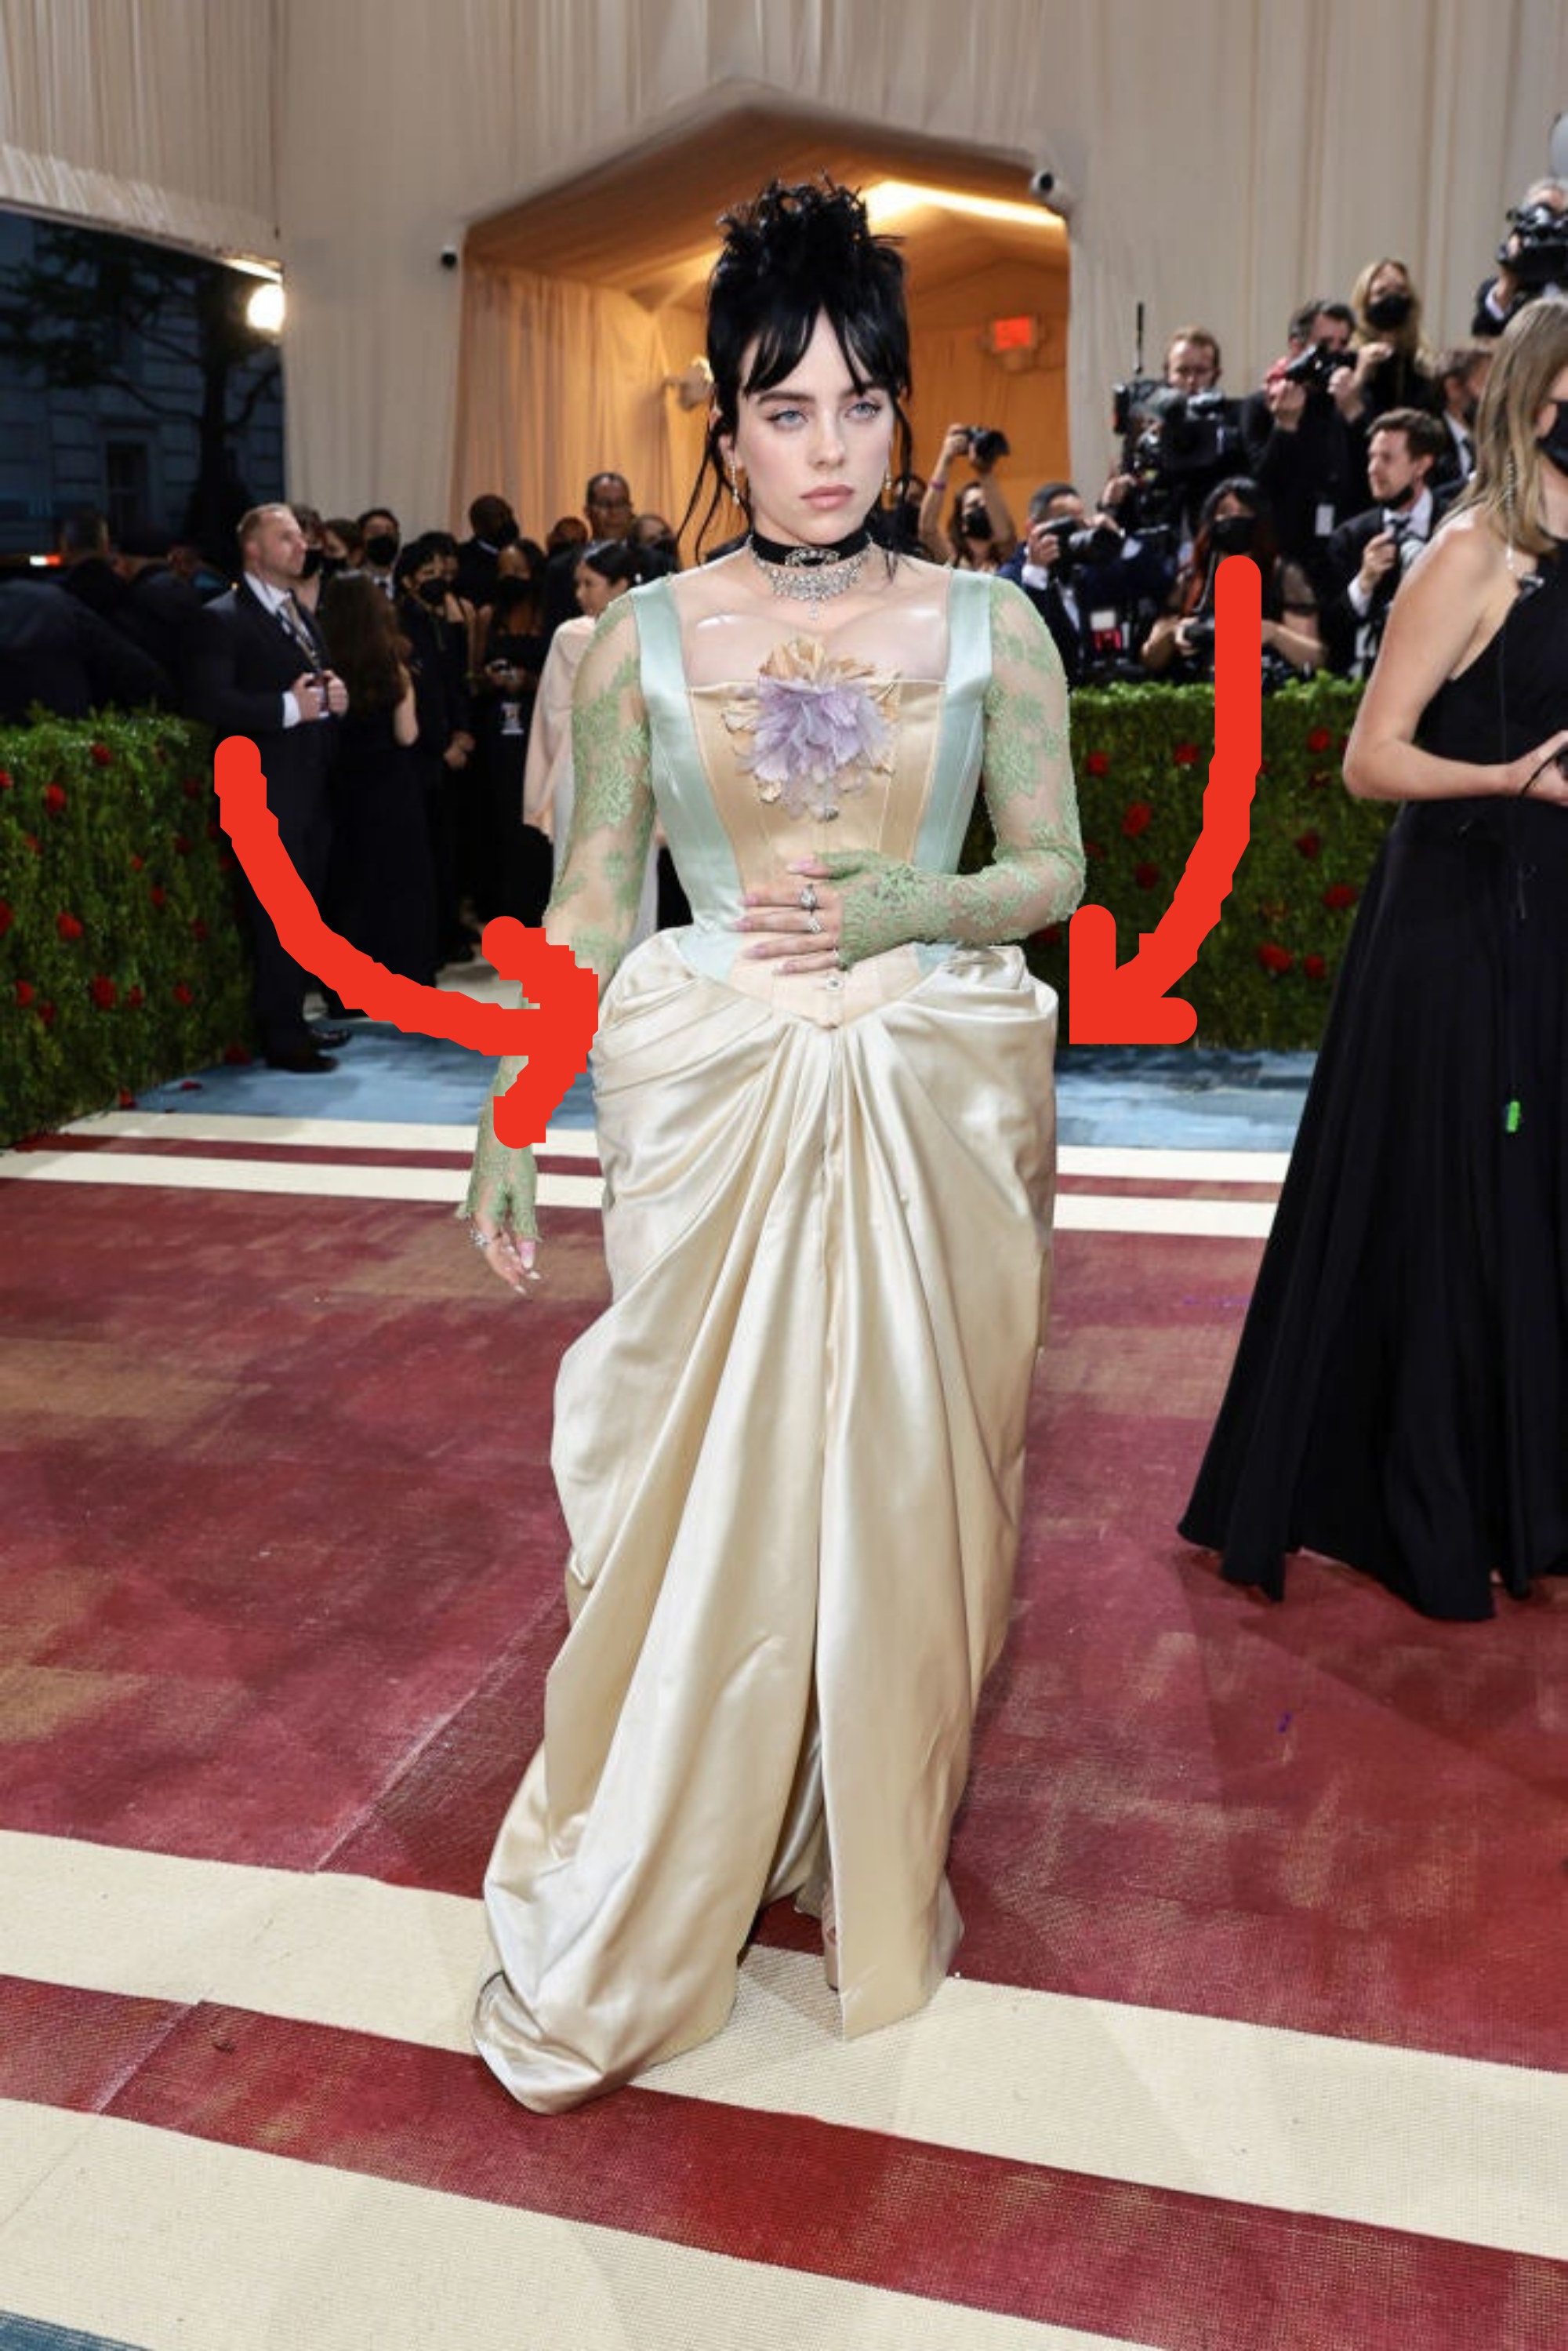 Arrows point out the bustle she&#x27;s wearing, which causes the bottom of her dress to extend backward